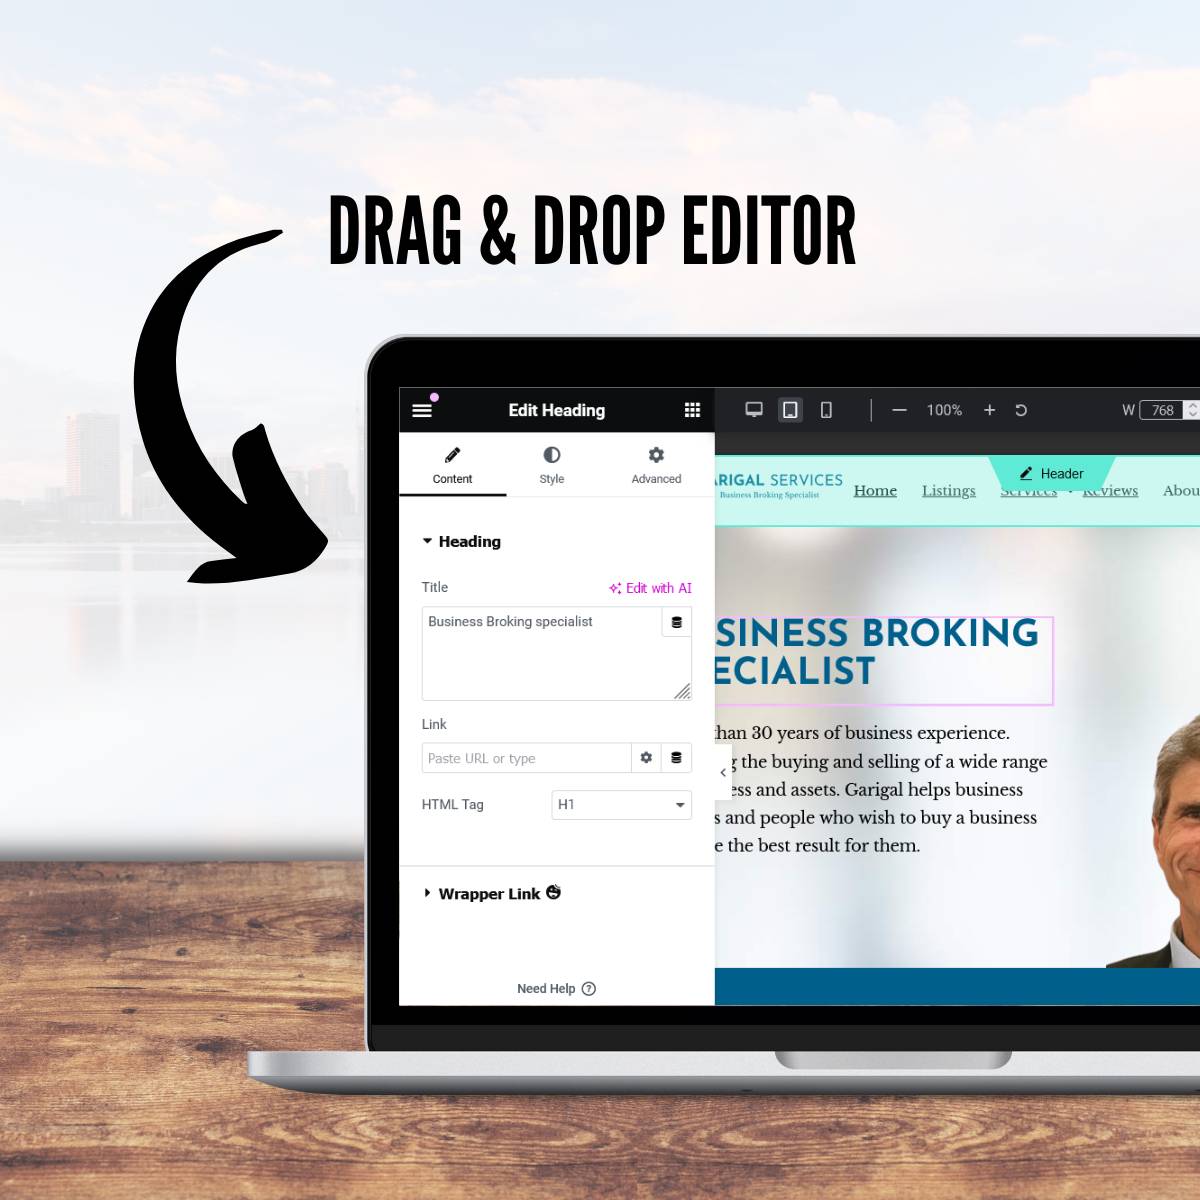 Drag and Drop Editor for website editing